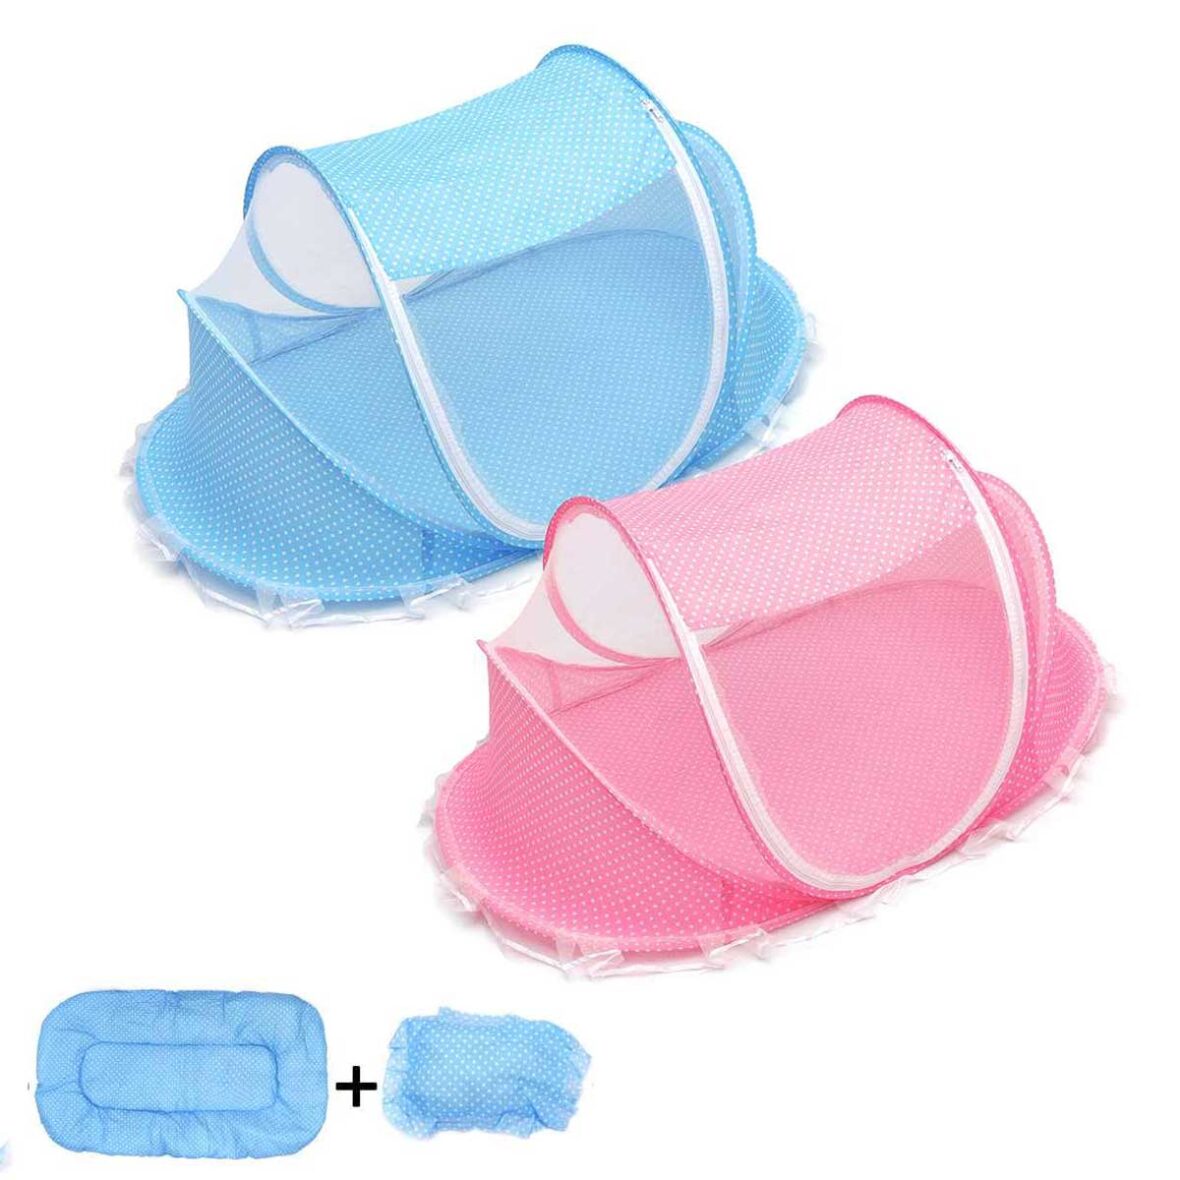 Baby Bed Tent Portable Foldable Mosquito Net Newborn Bedroom Travel Bed Baby Bed